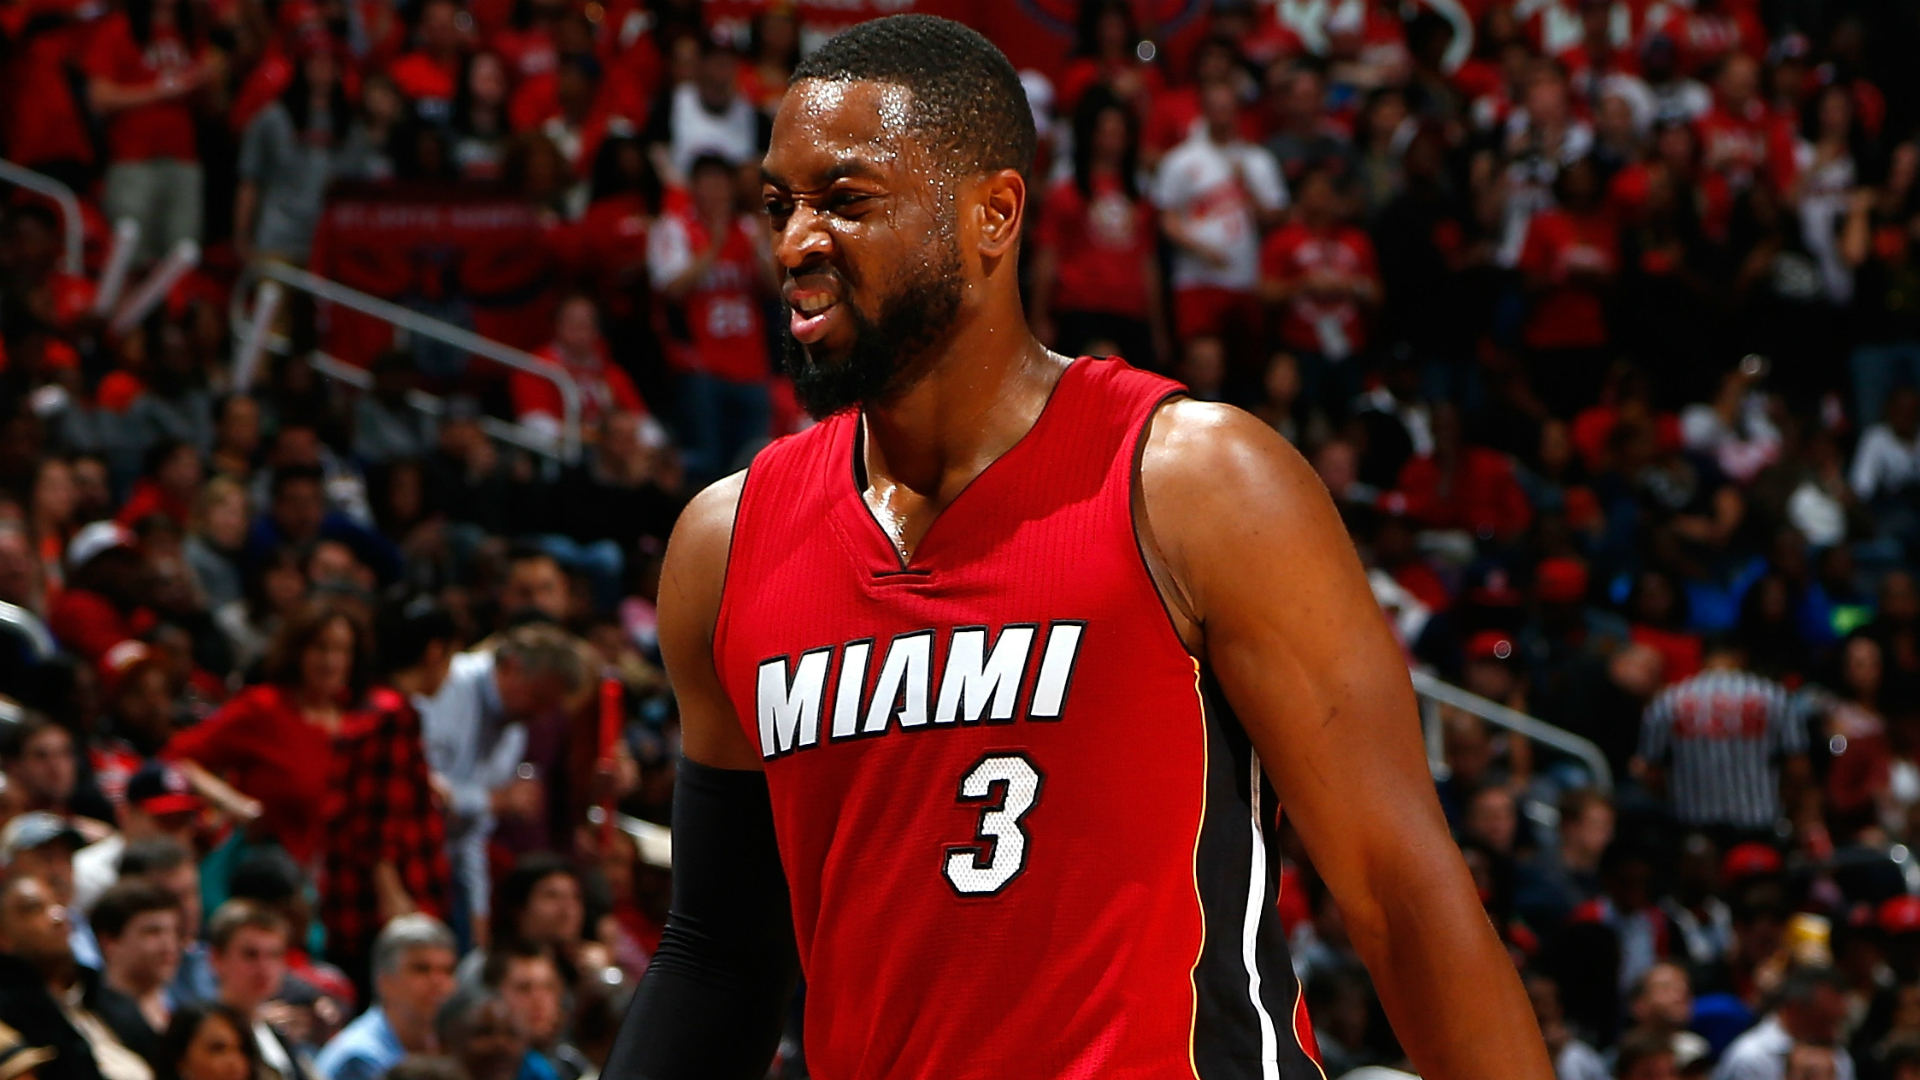 Dwyane Wade says he still is elite, even as a different player | NBA ...